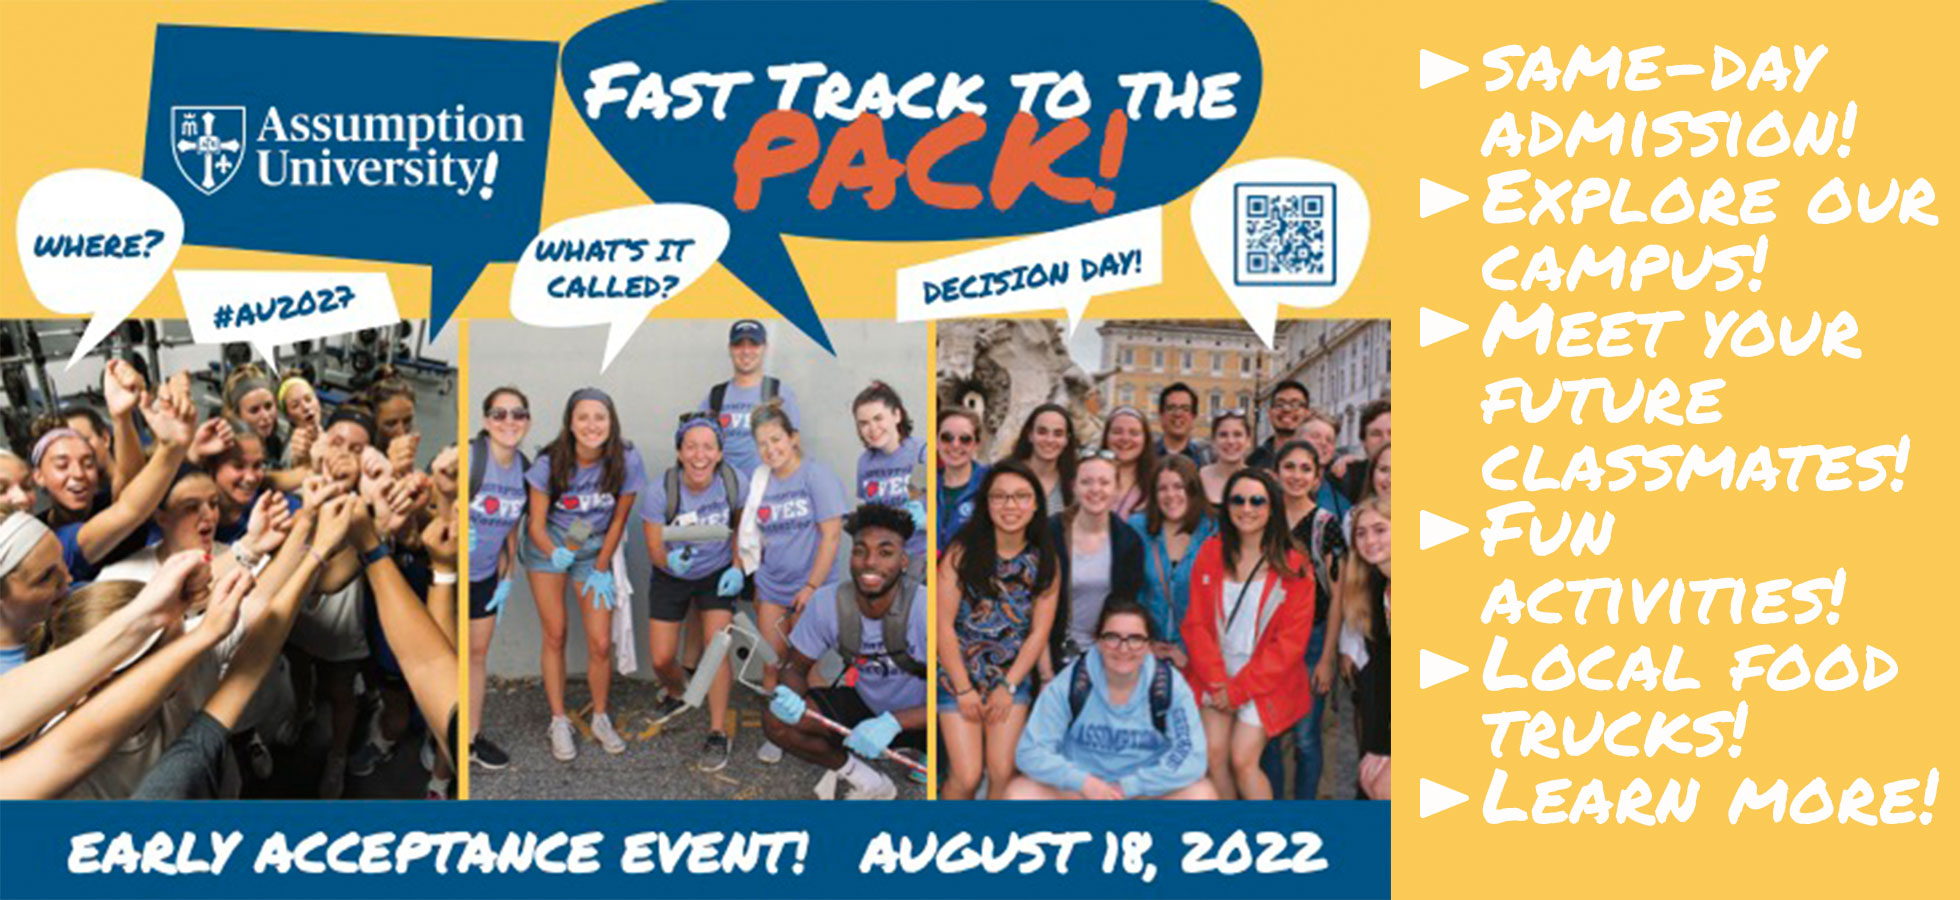 Fast Track to the Pack early acceptance event at Assumption